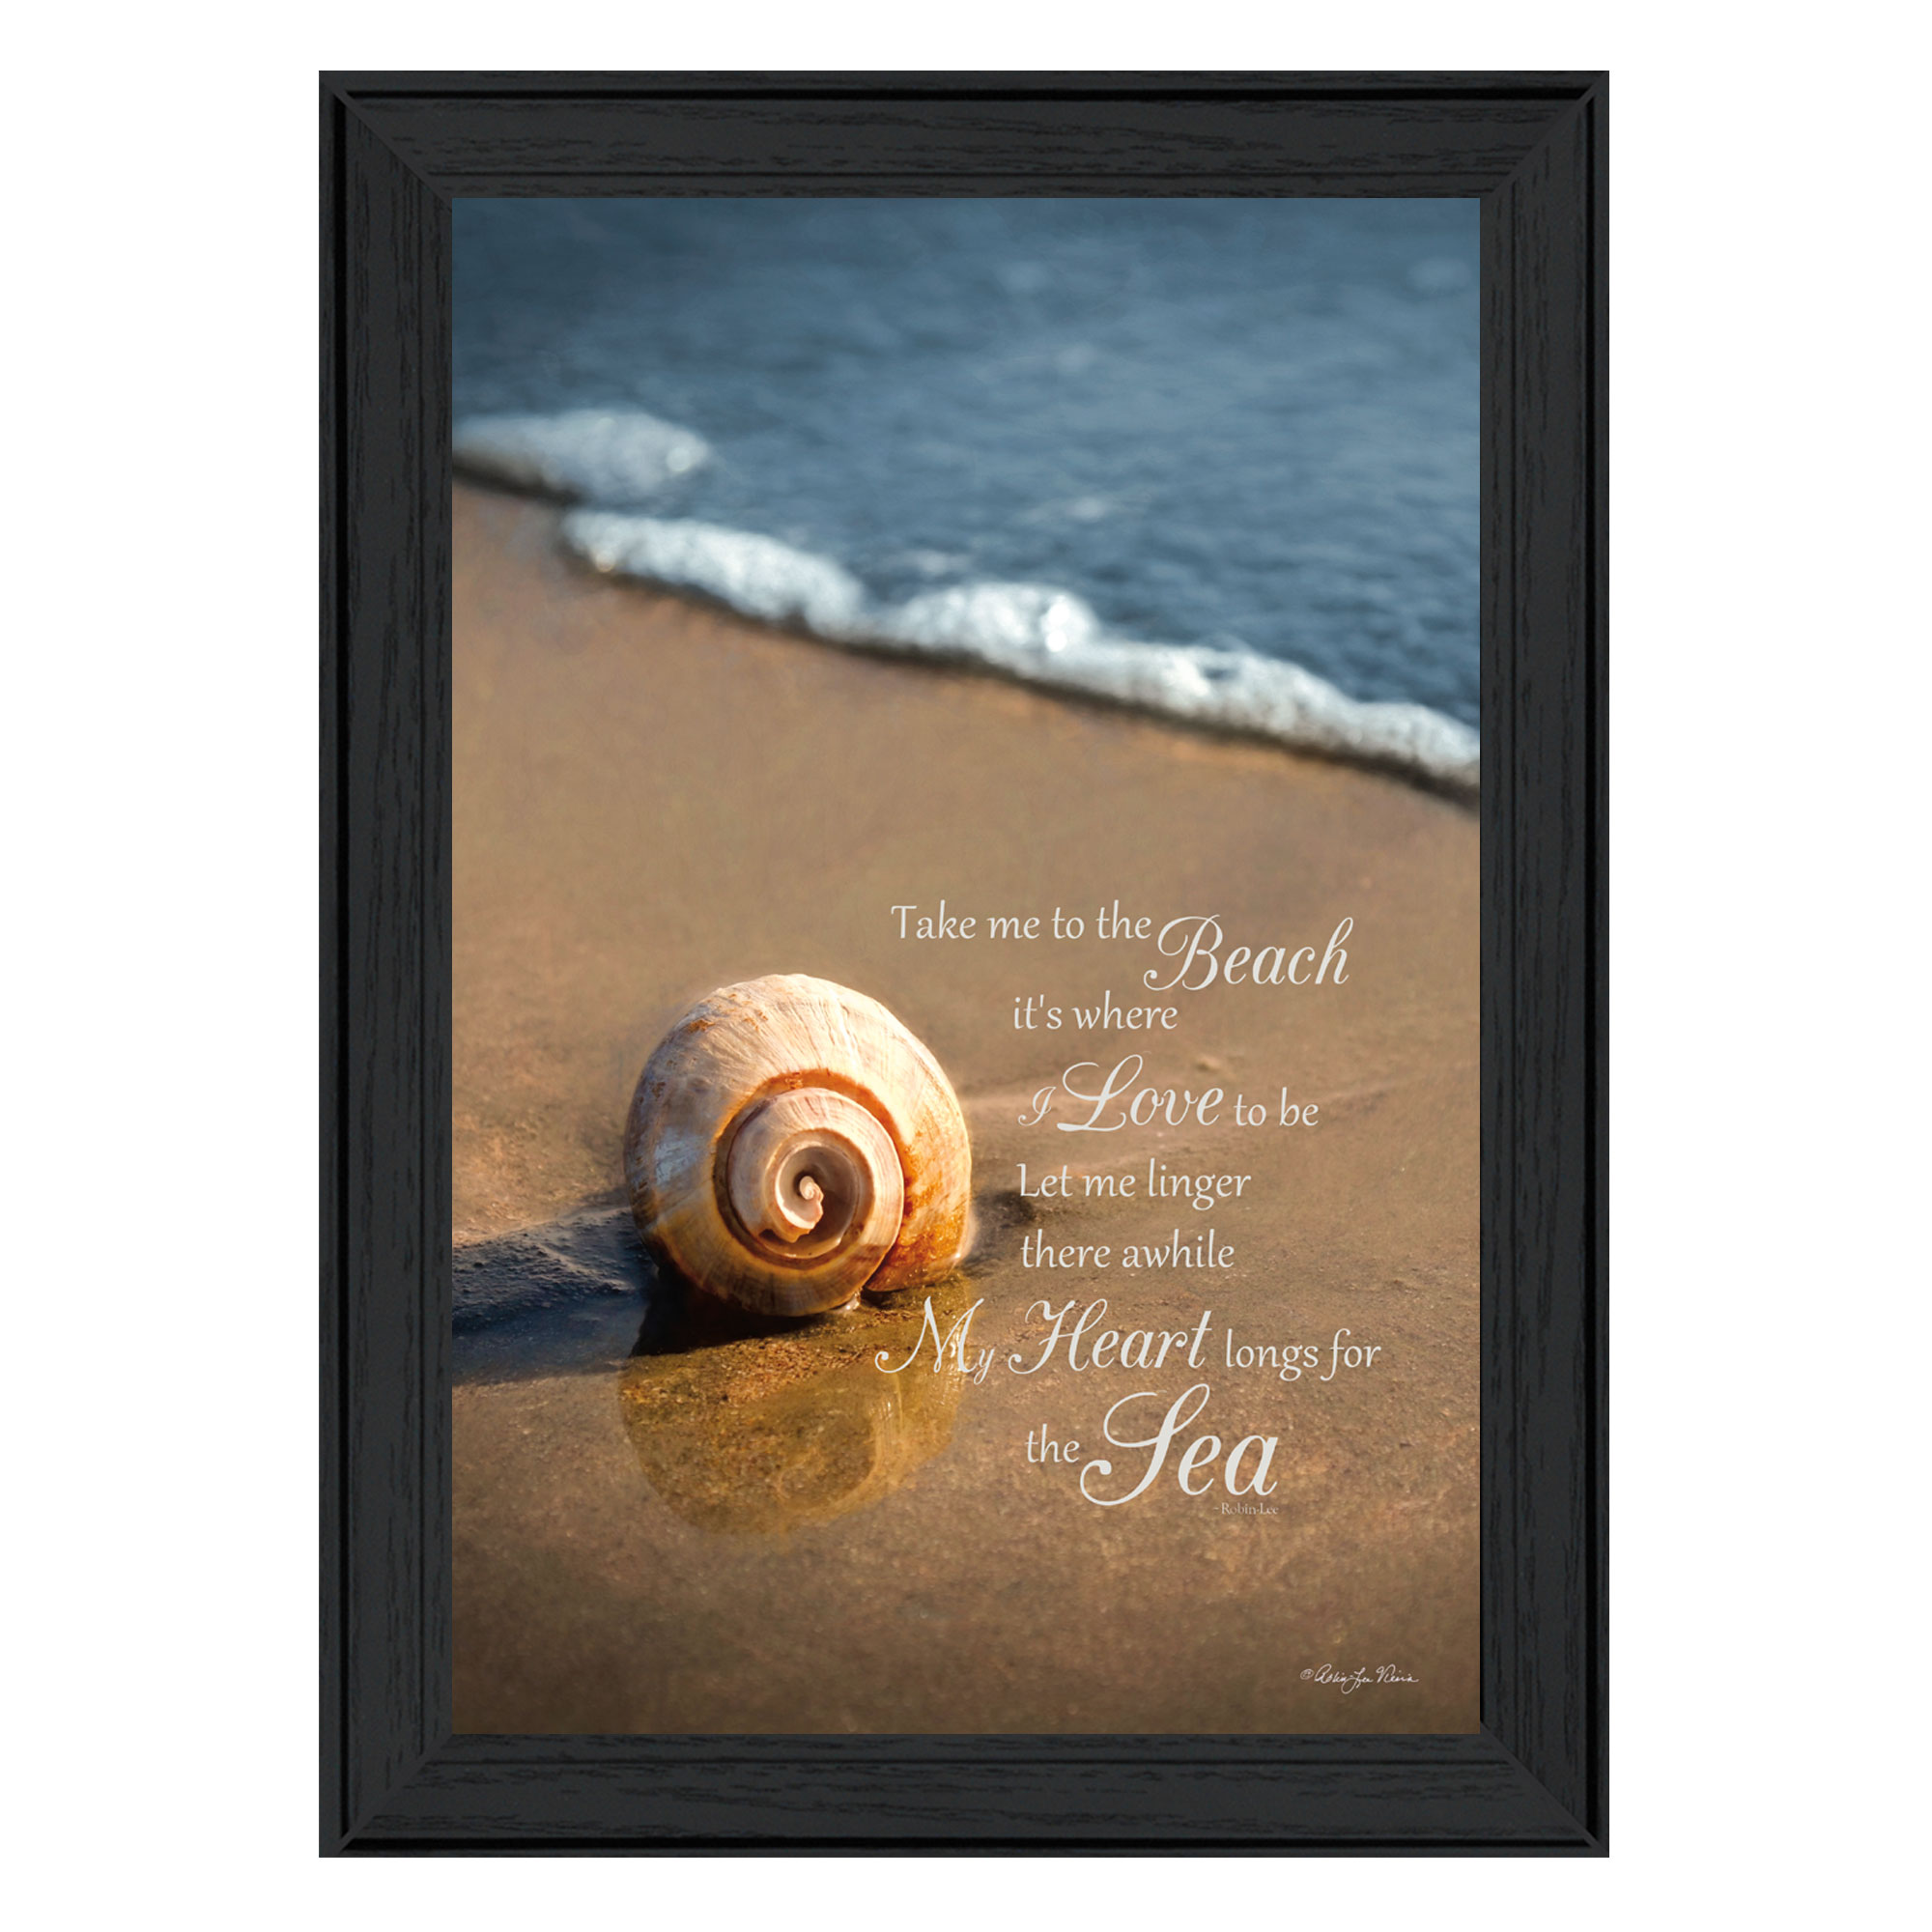 "Take Me to the Beach" By Robin-Lee Vieira, Printed Wall Art, Ready To Hang Framed Poster, Black Frame